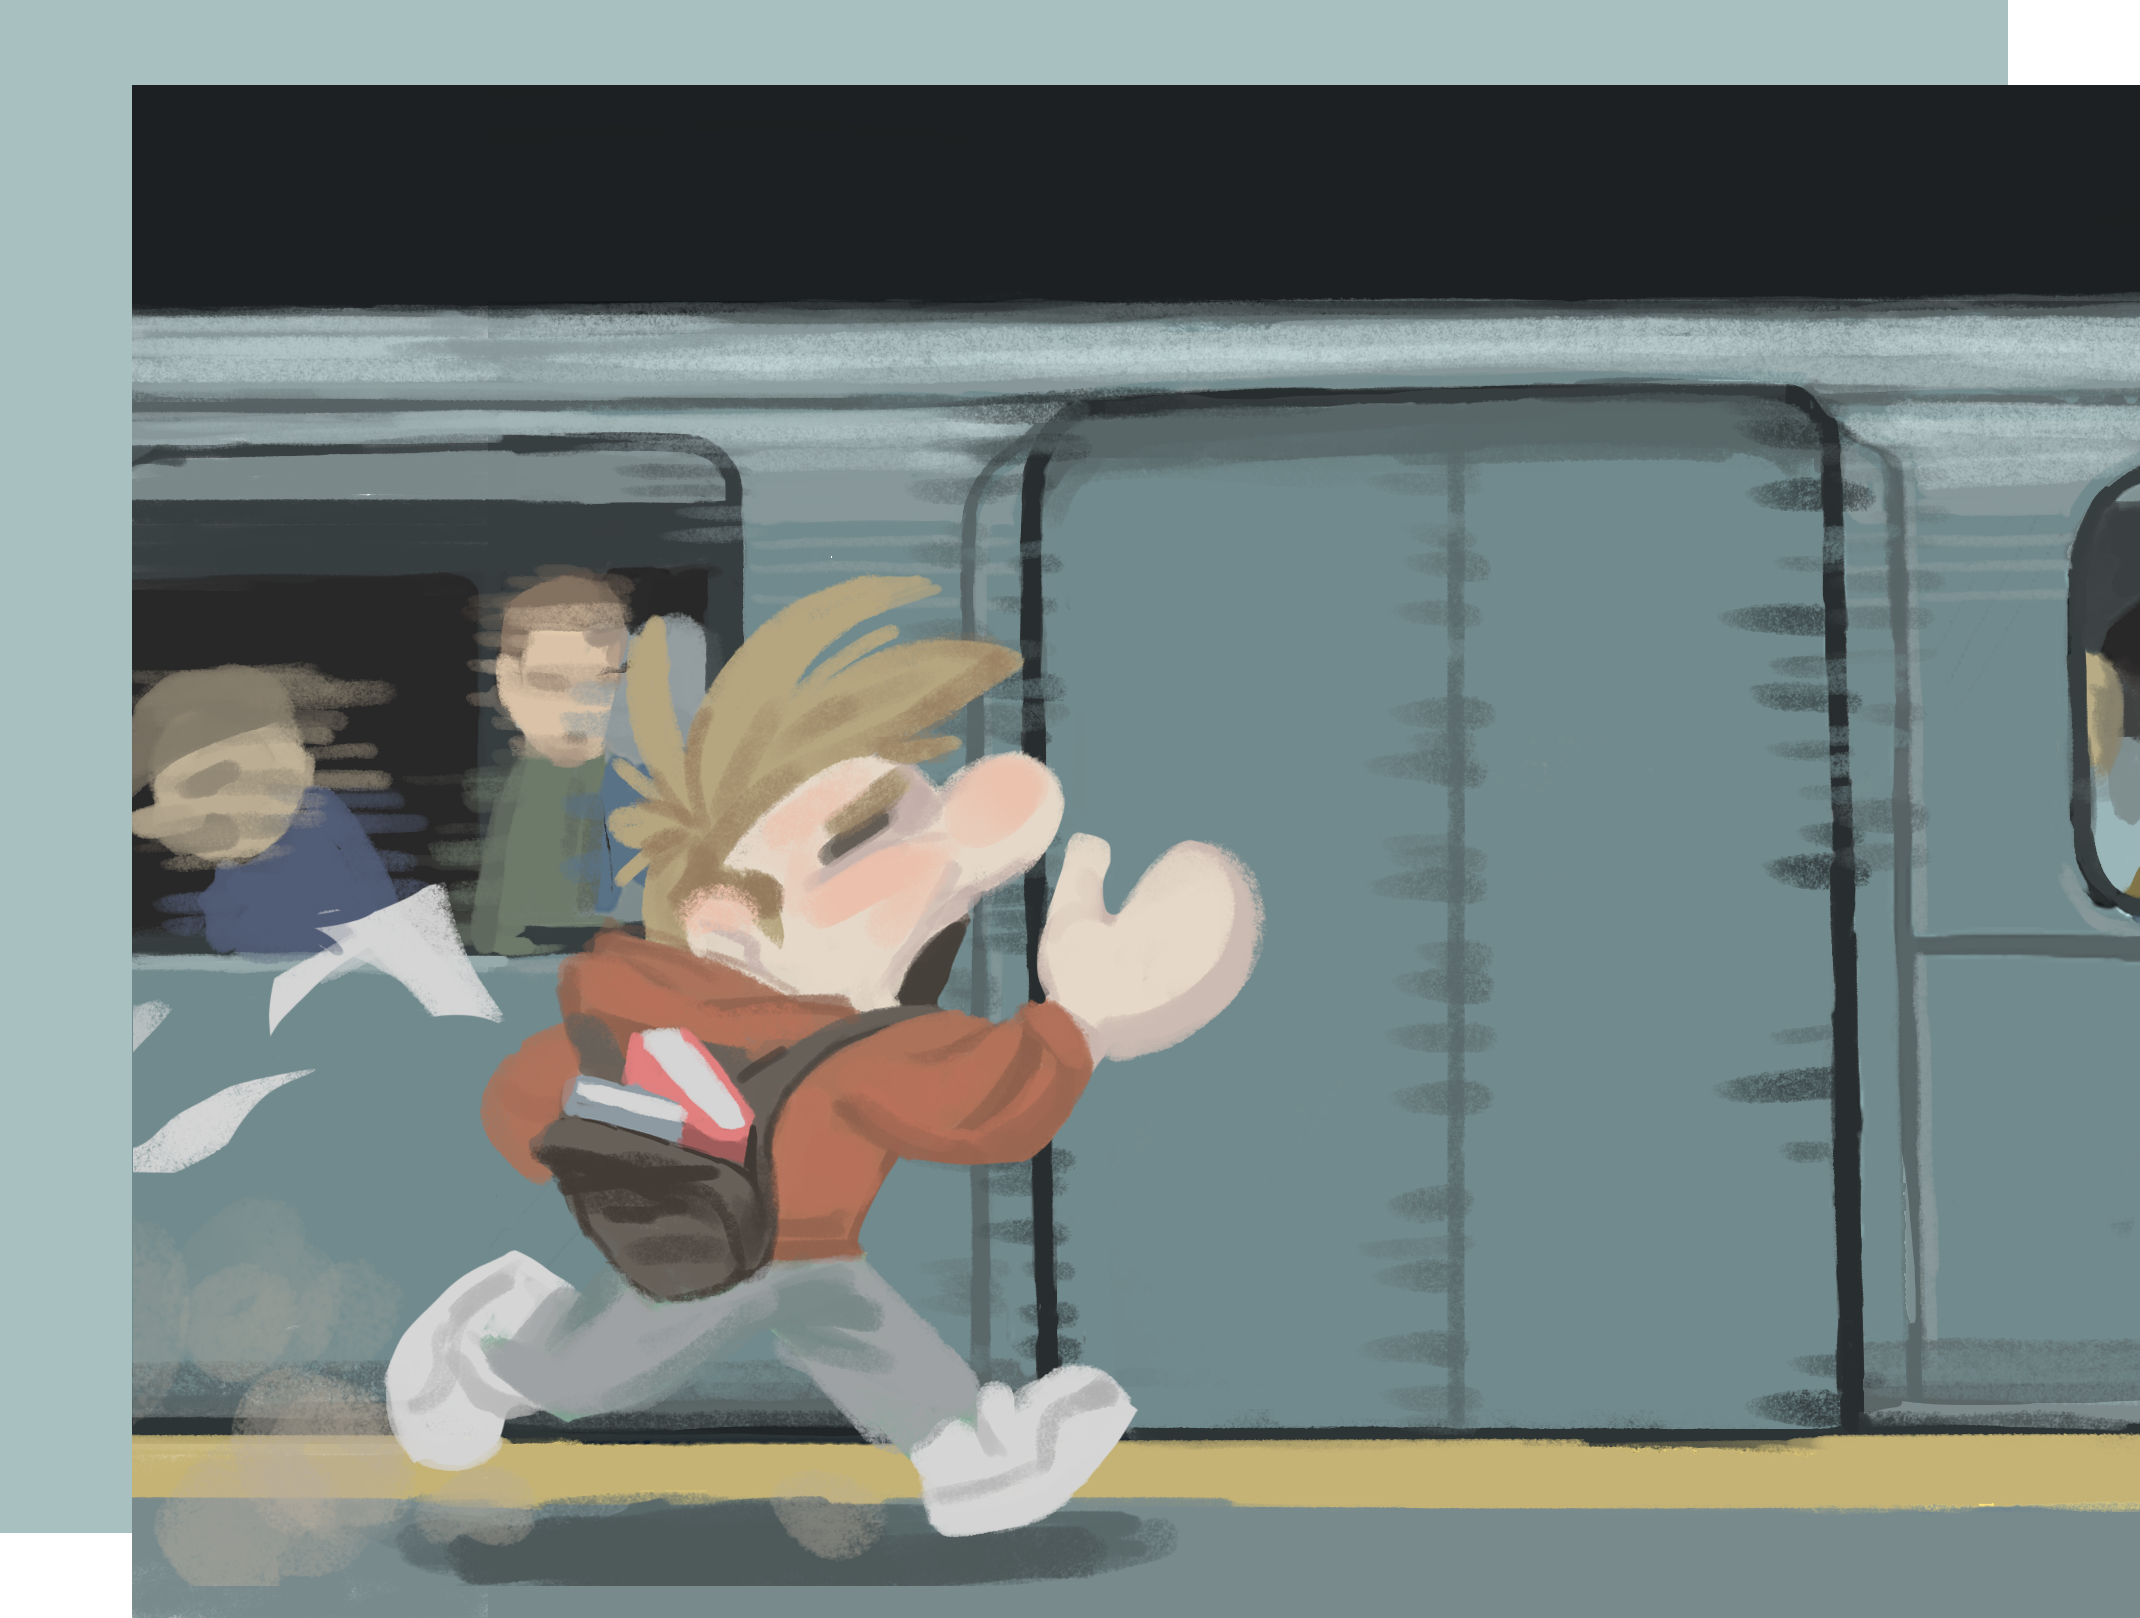 A guy running late to catch the train